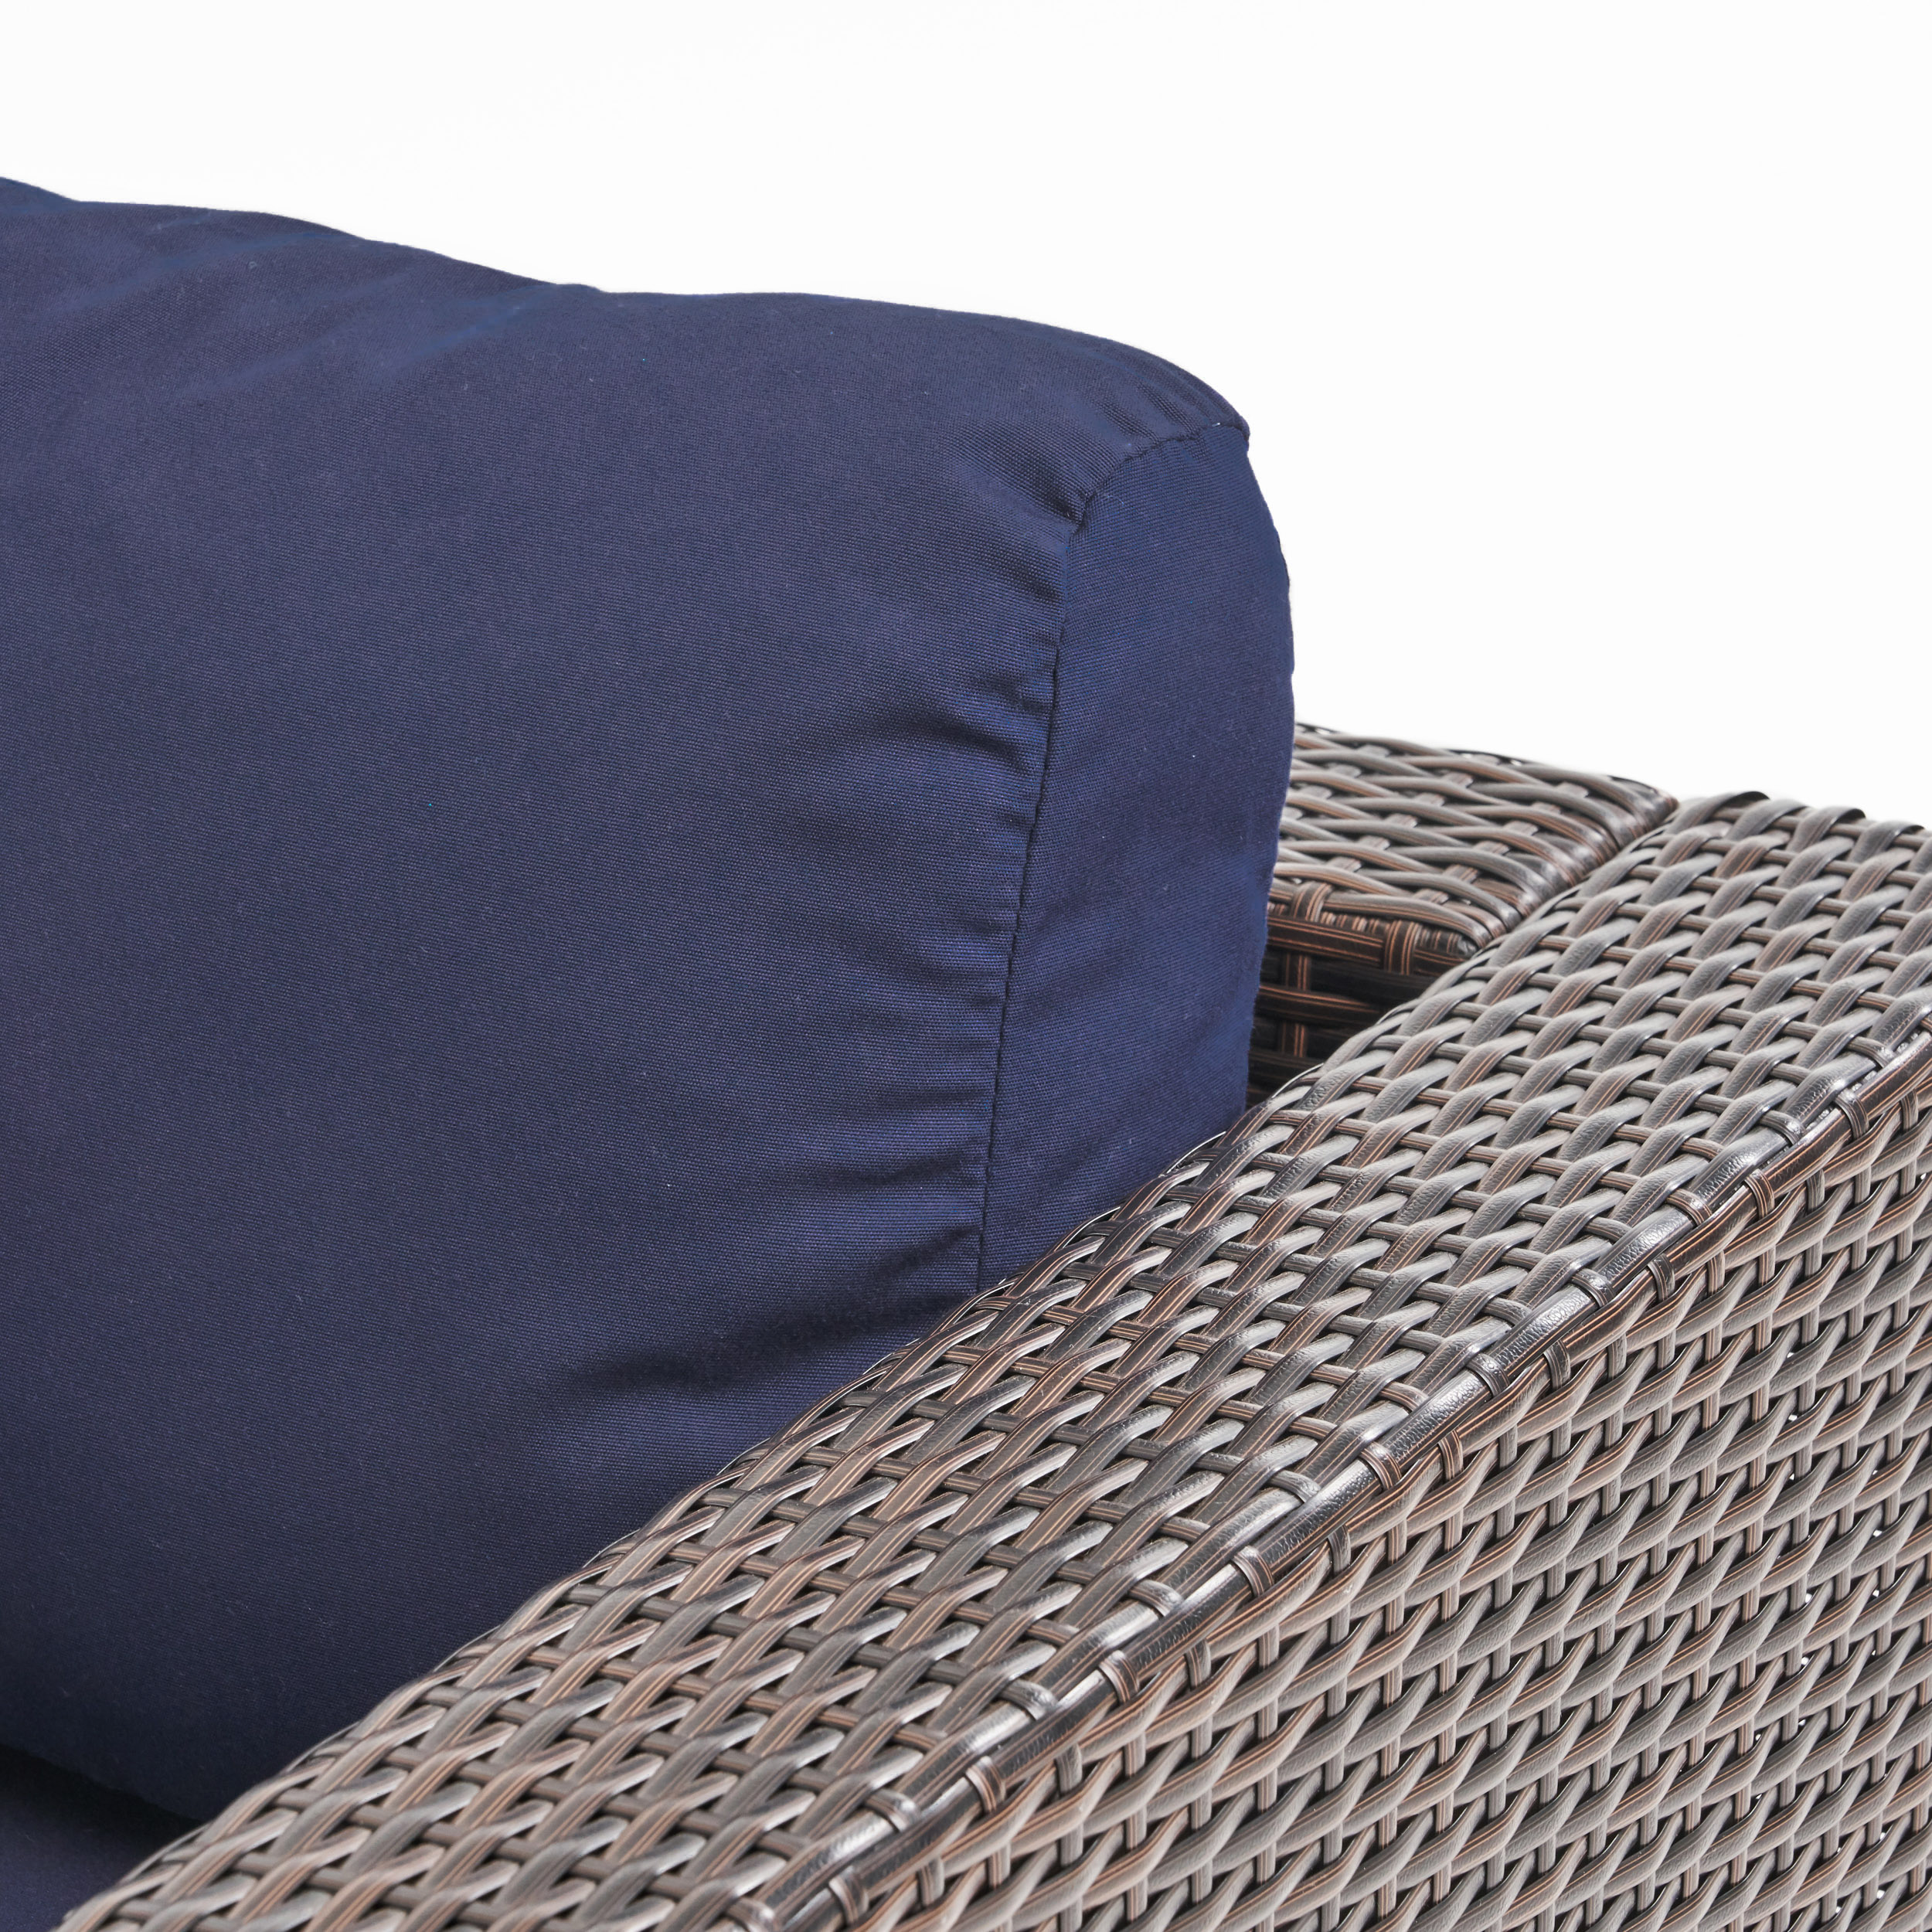 Faviola Outdoor 6 Seater Wicker Sectional Sofa Set with Sunbrella Cushions, Multibrown and Sunbrella Canvas Navy - image 3 of 10